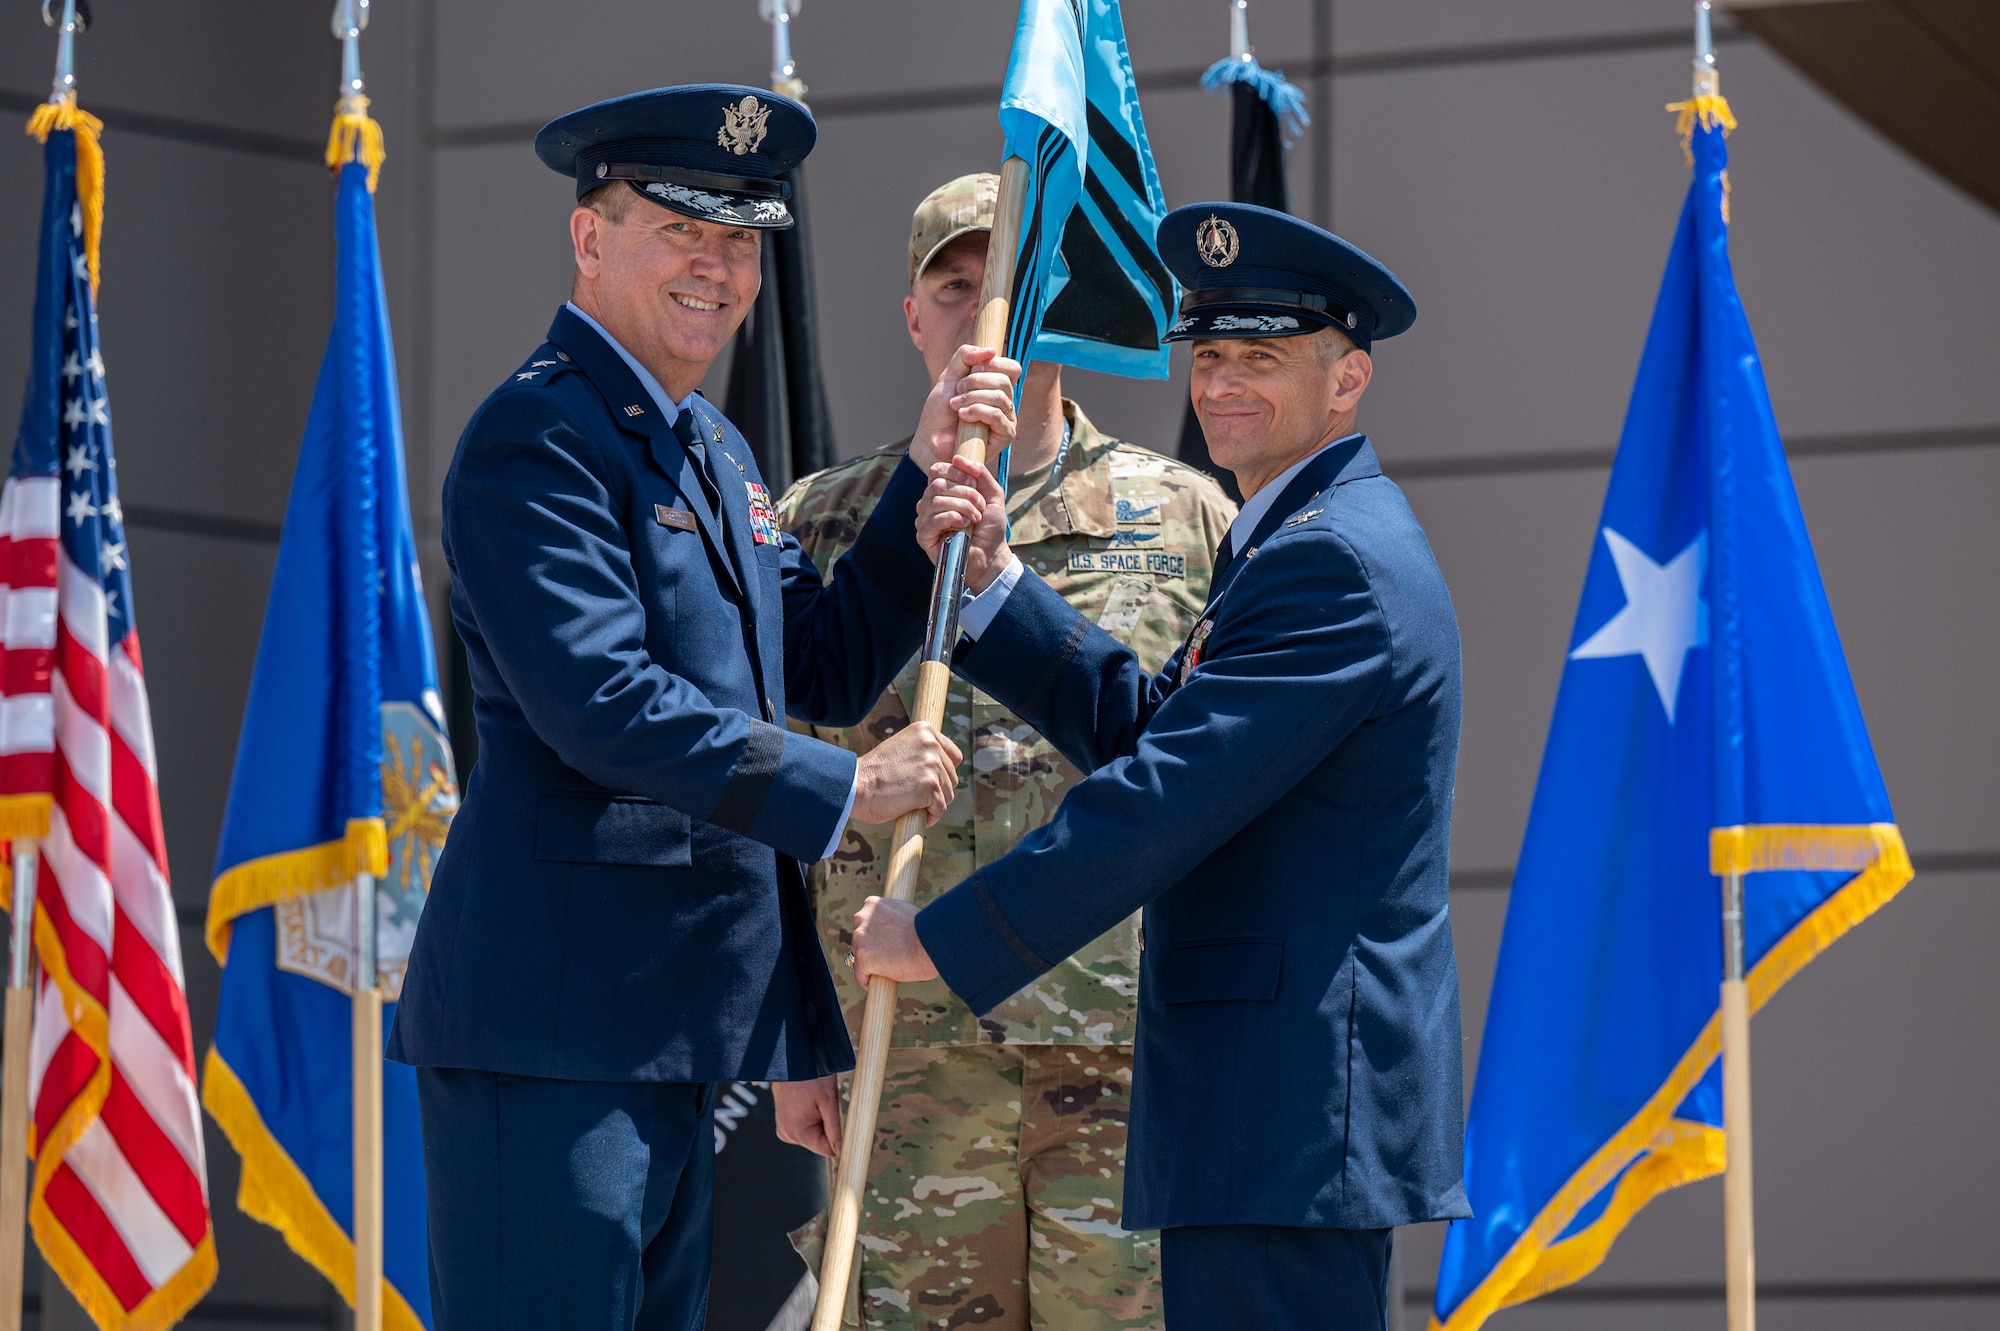 U.S. Space Force Col. Jay Steingold, the Delta 11 incoming commander, assumes command of Delta 11 during a change of command ceremony at Schriever Space Force Base, Colorado, July 7, 2023. Delta 11 is responsible for delivering realistic, threat-informed test and training resources to U.S. Space Force, joint, and coalition space operators via live, virtual, and constructive threat replication, leveraging the National Space Test and Training Complex across multiple space warfighting disciplines. (U.S. Space Force photo by Ethan Johnson)